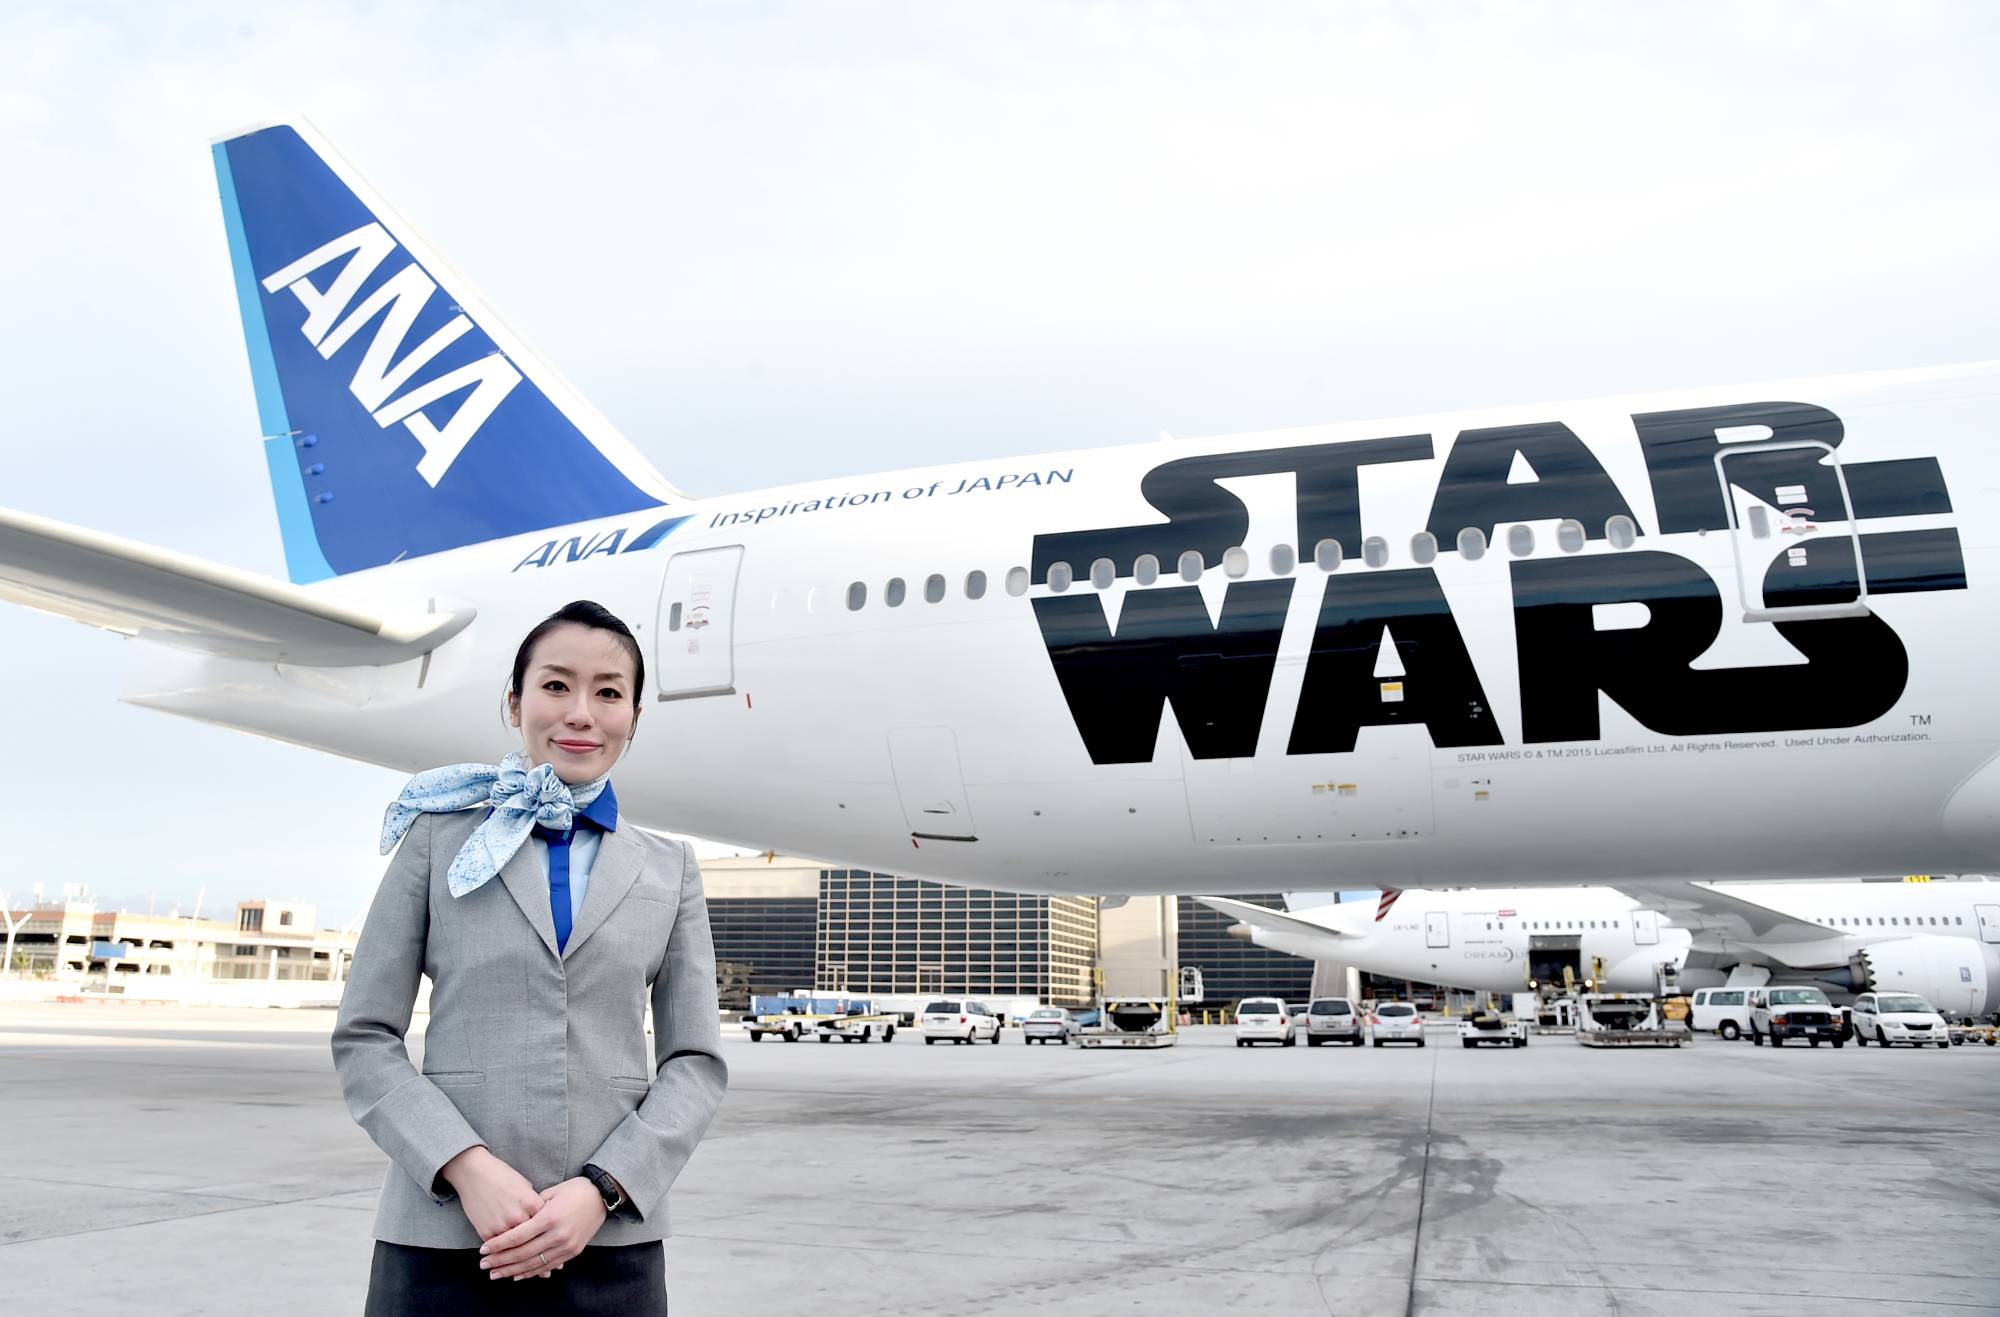 ANA’s BB-8 Themed Jet Lands at Los Angeles International Airport